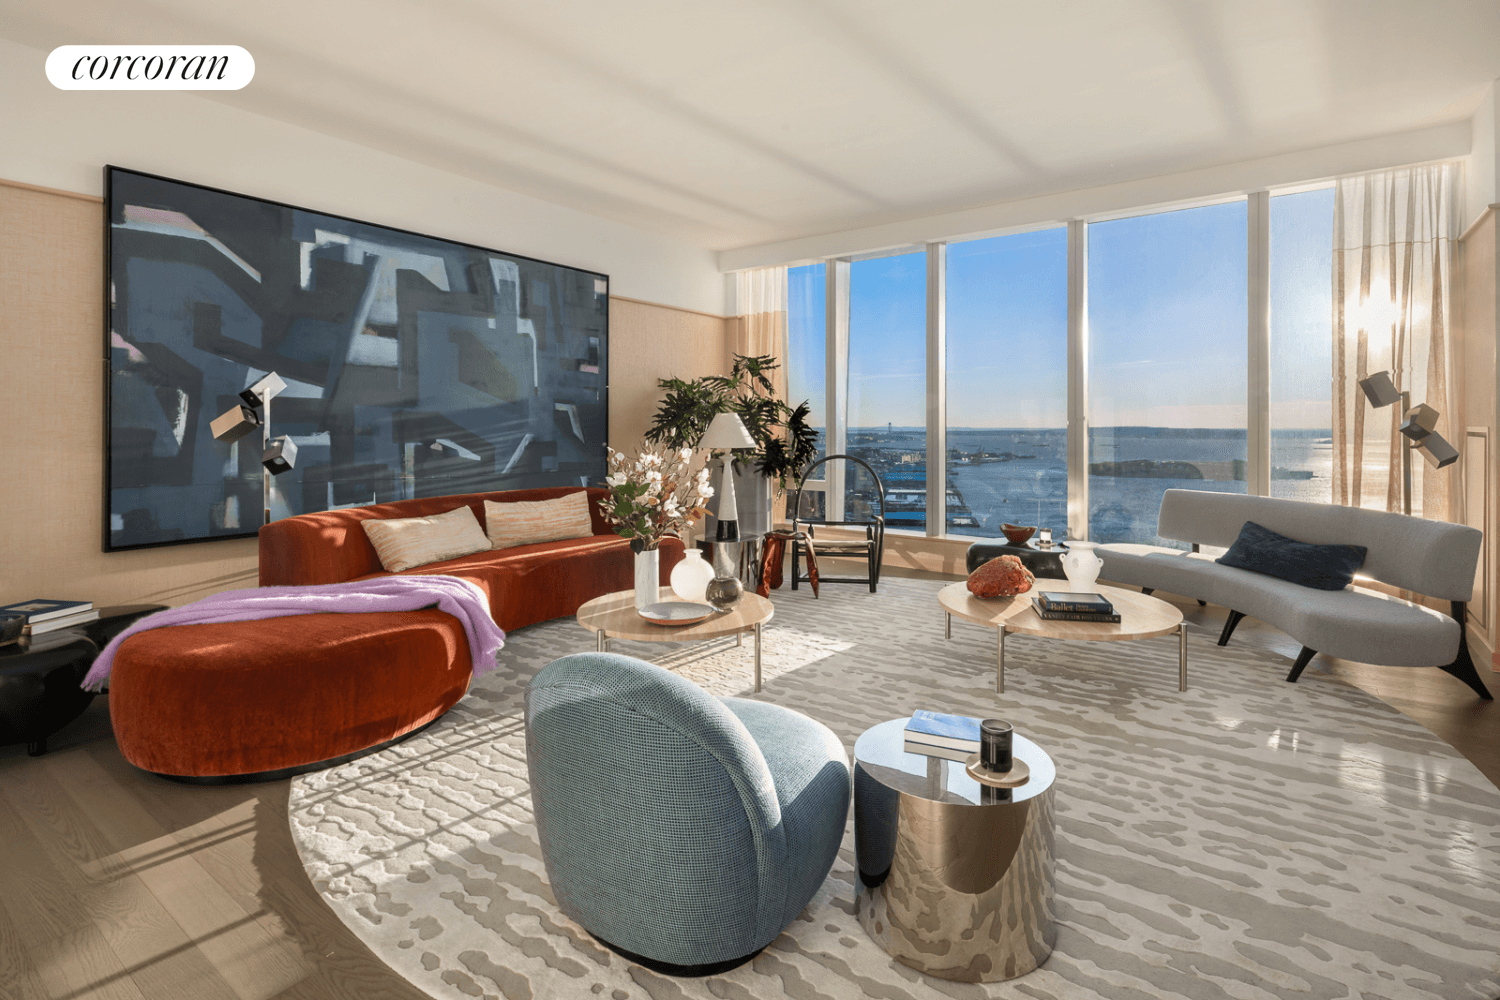 ONE MANHATTAN SQUARE OFFERS ONE OF THE LAST 20 YEAR TAX ABATEMENTS AVAILABLE IN NEW YORK CITYSpecial Features 11' Ceilings.